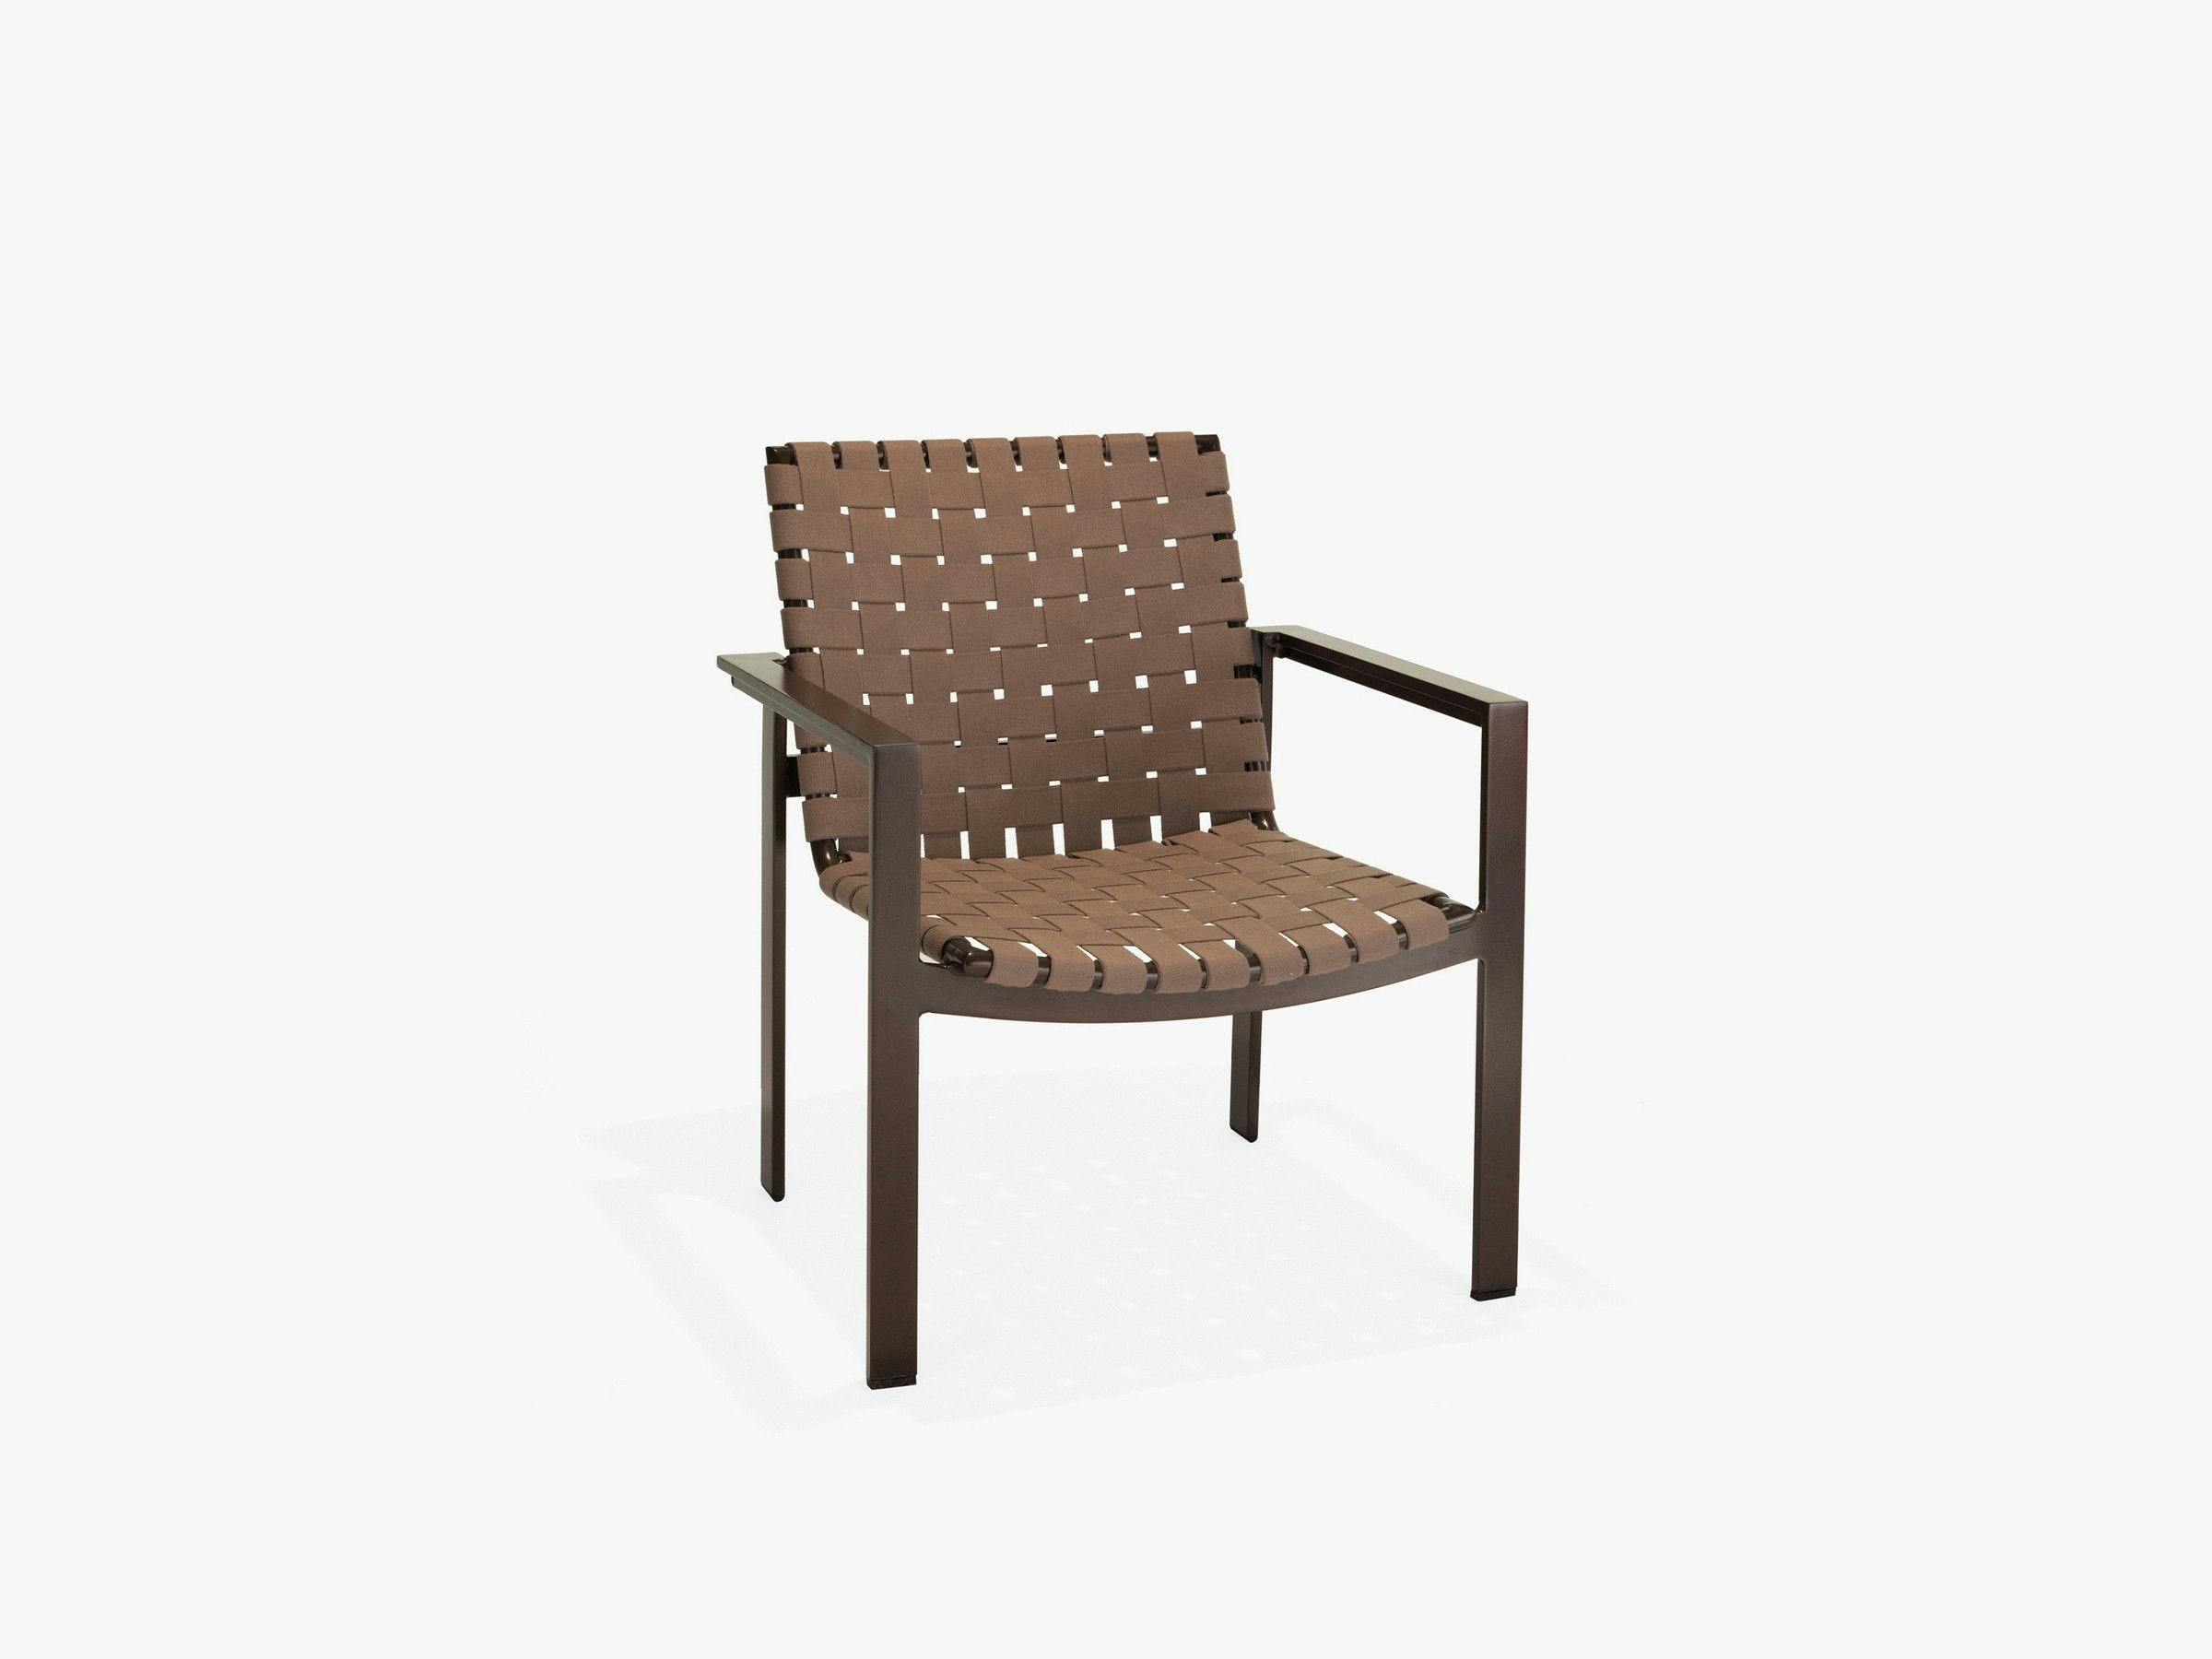 Meza Nesting Dining Chair with Arms, Suncloth Weave